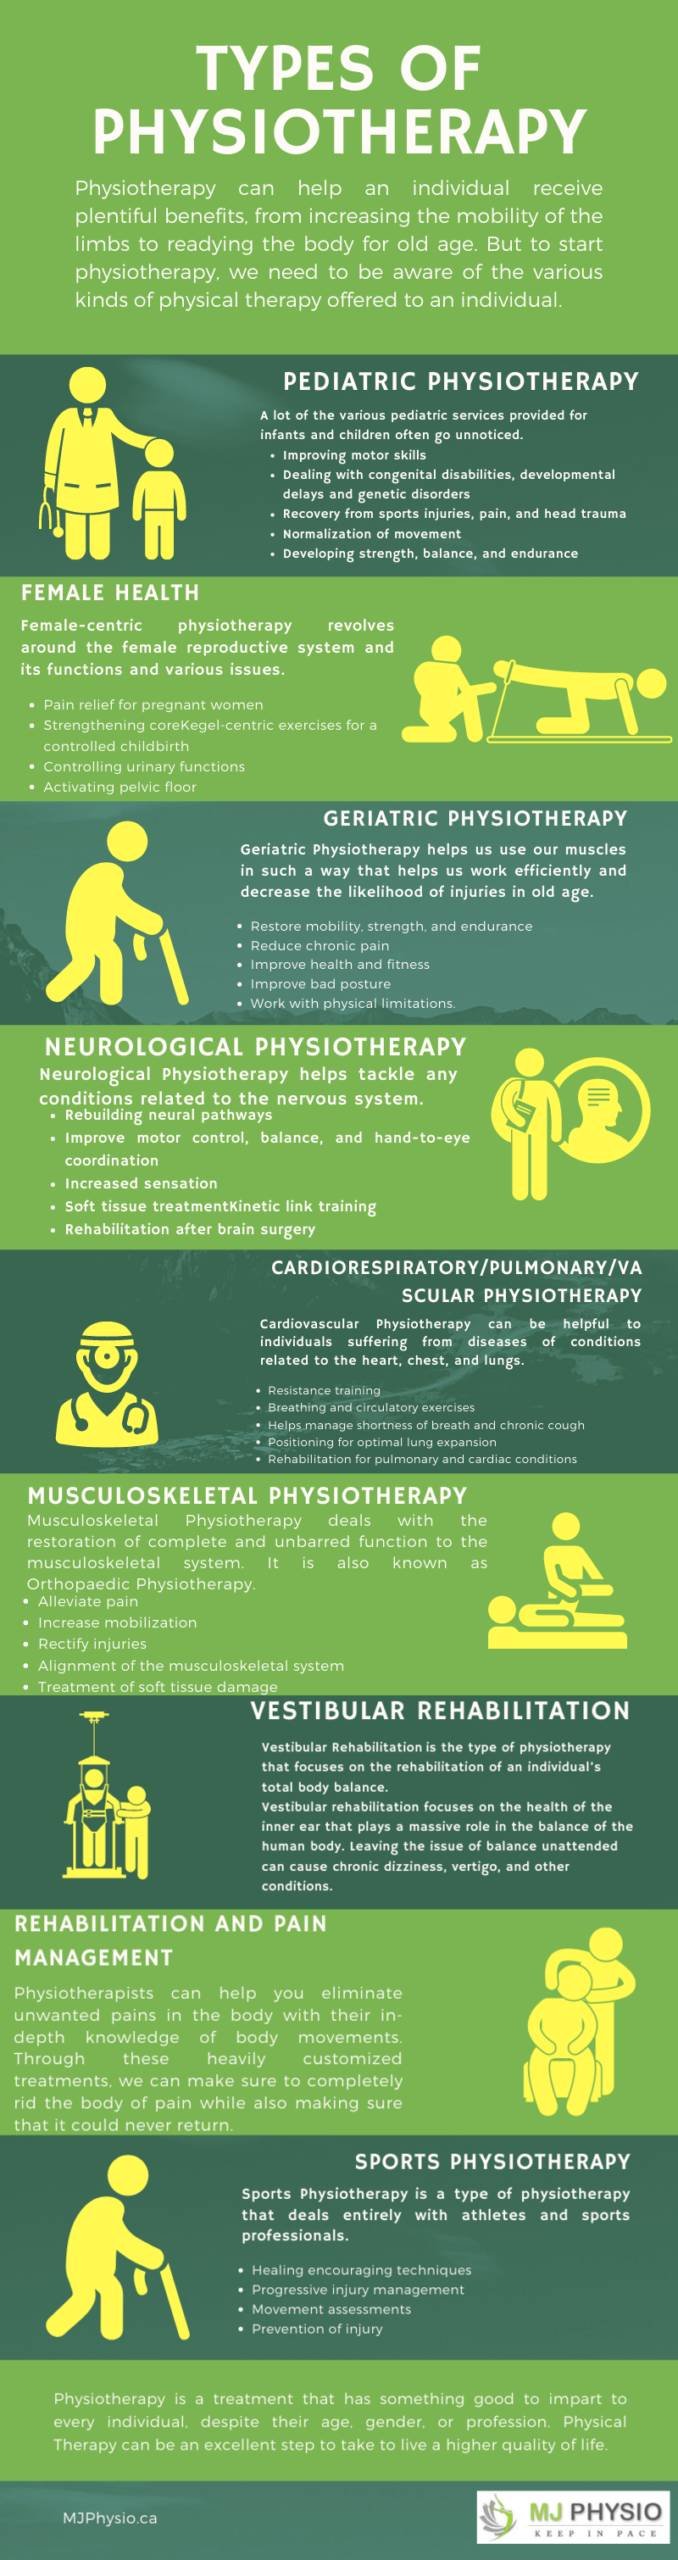 Physiotherapy – Centennial Physio Therapy